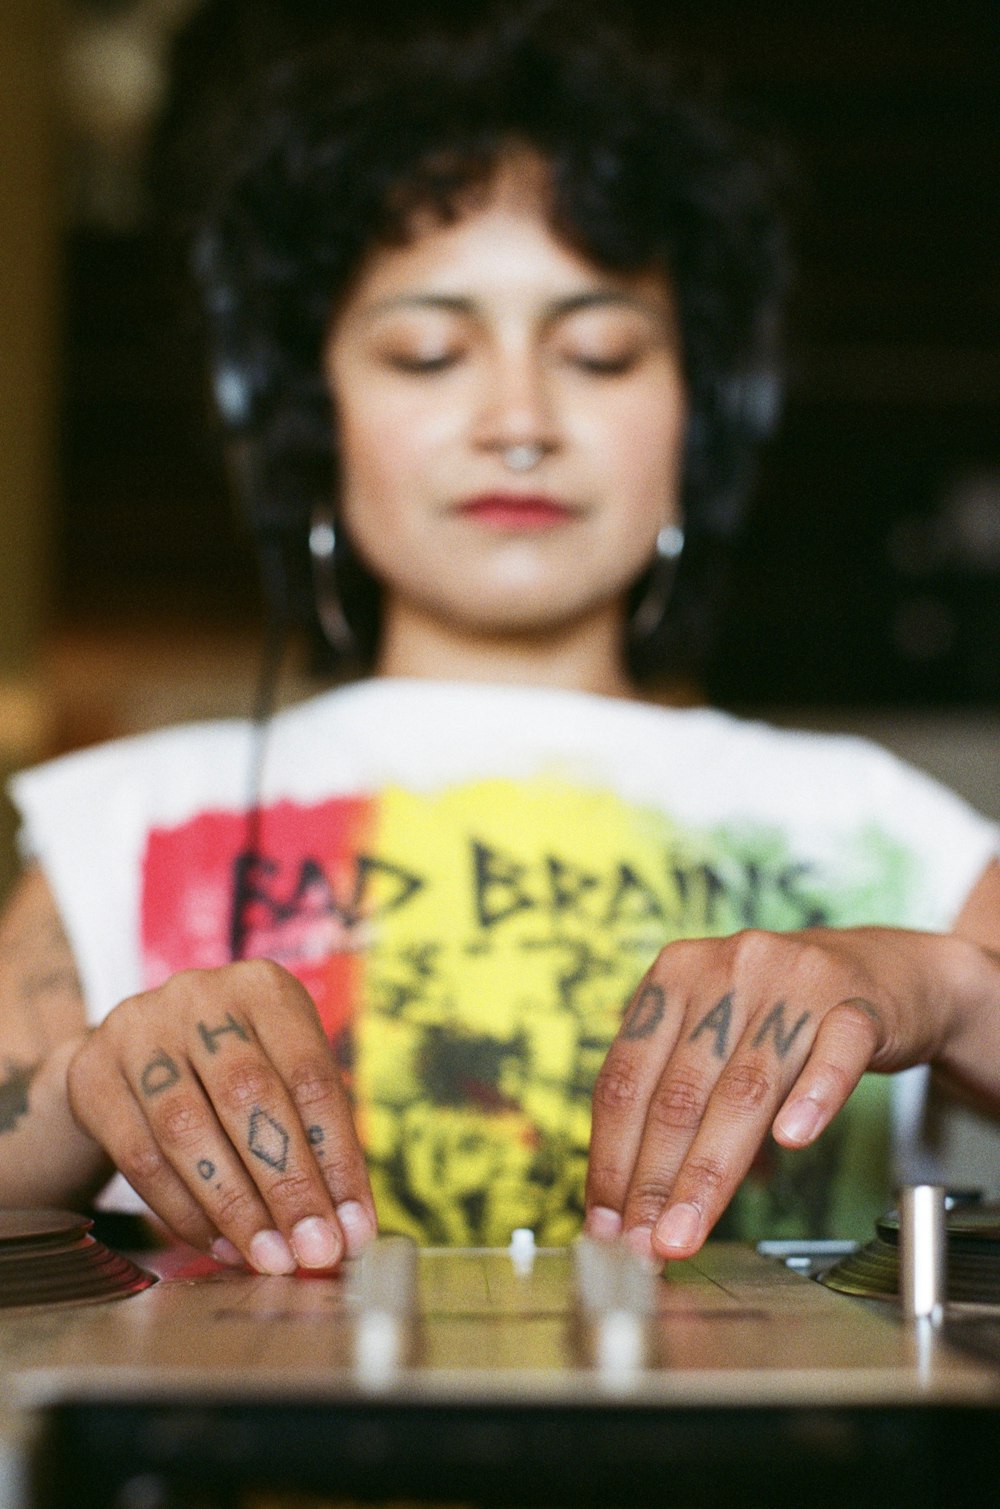 a woman with headphones on playing a dj's turntable